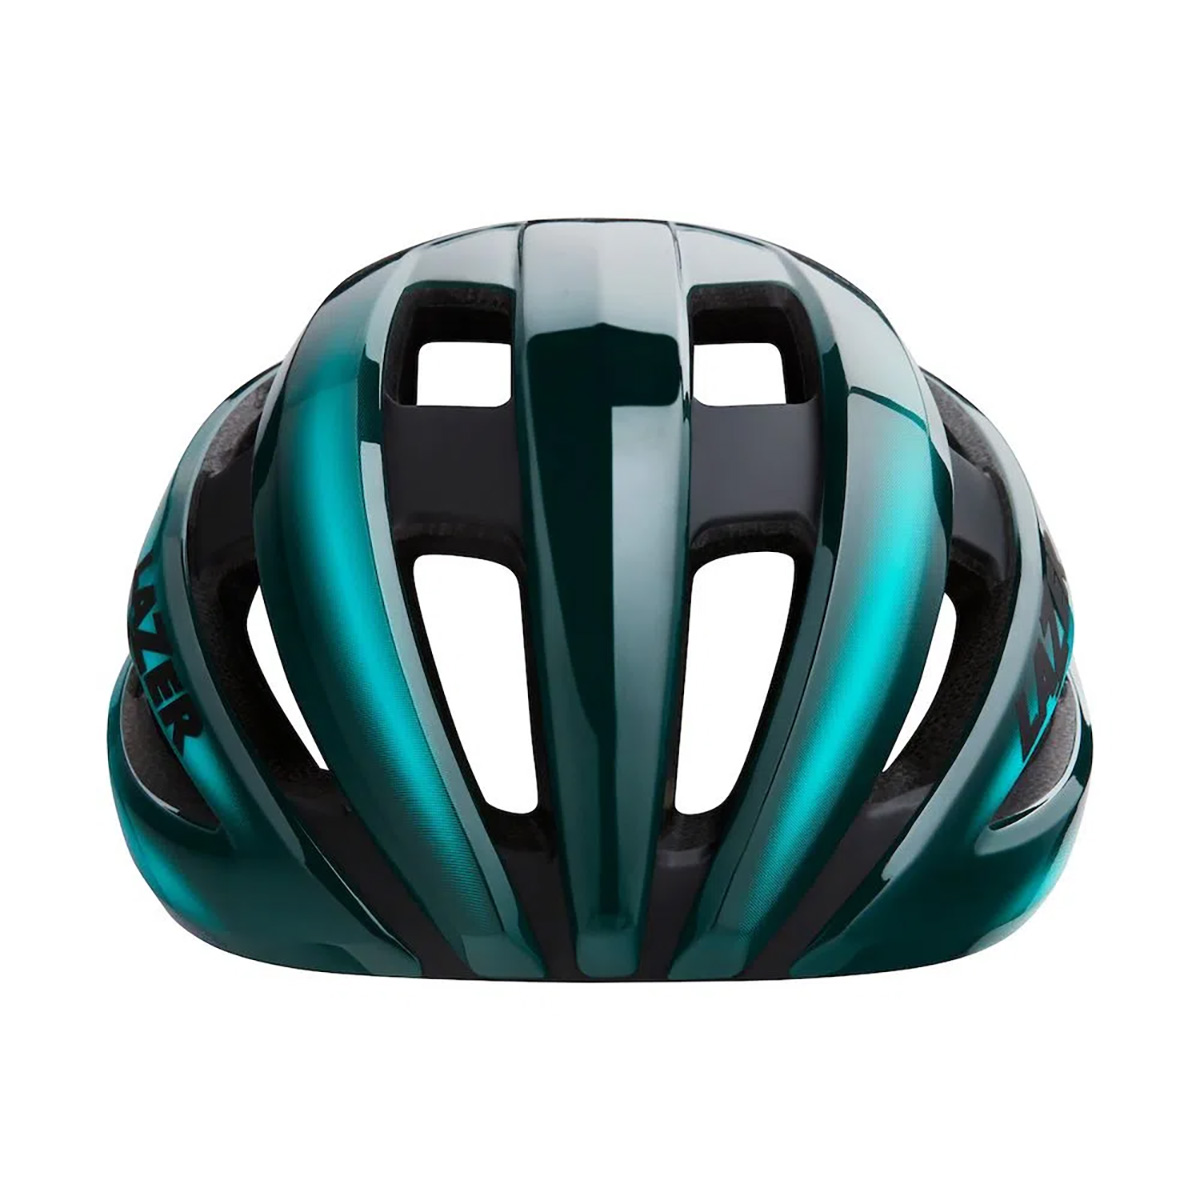 Capacete Ciclismo Sphere ARS Fit System - Lazer